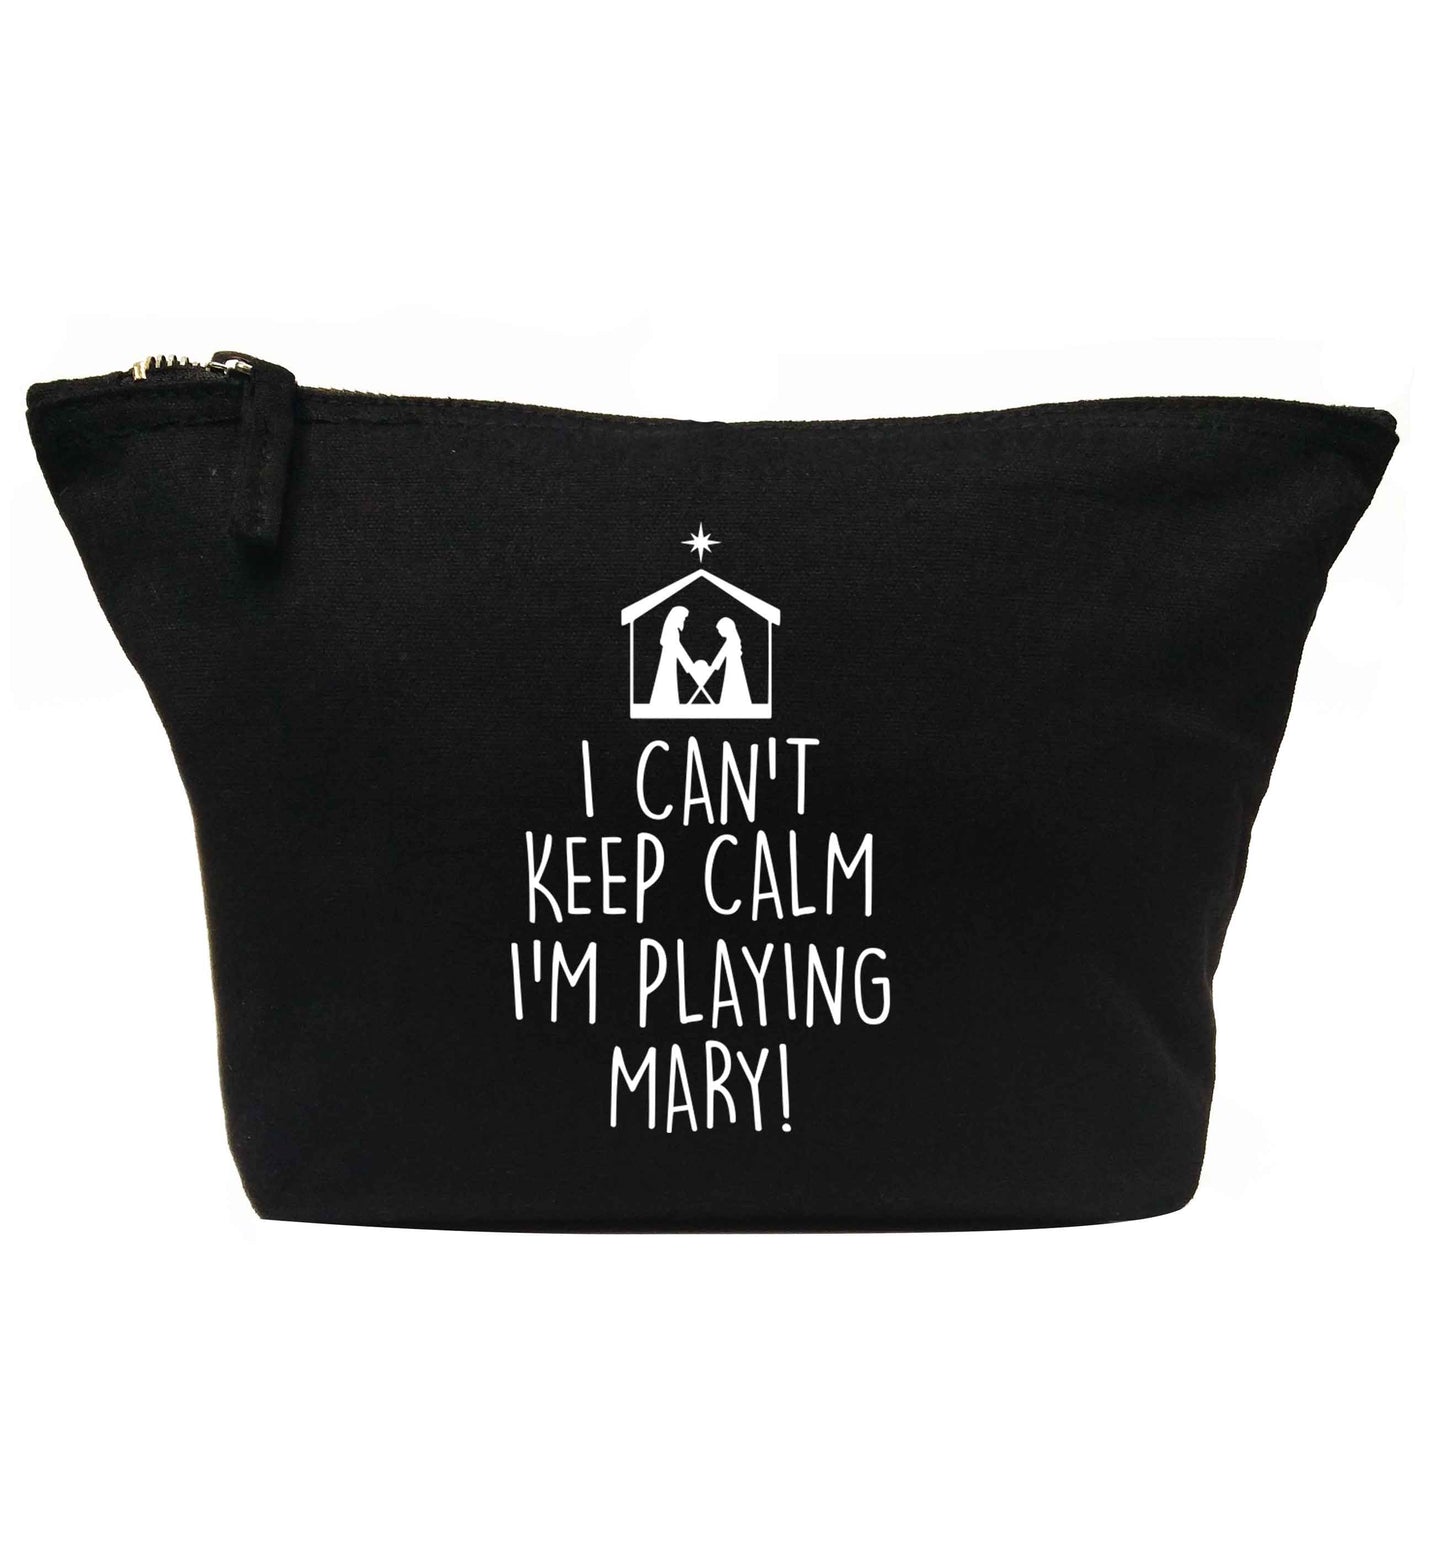 I can't keep calm I'm playing Mary | makeup / wash bag